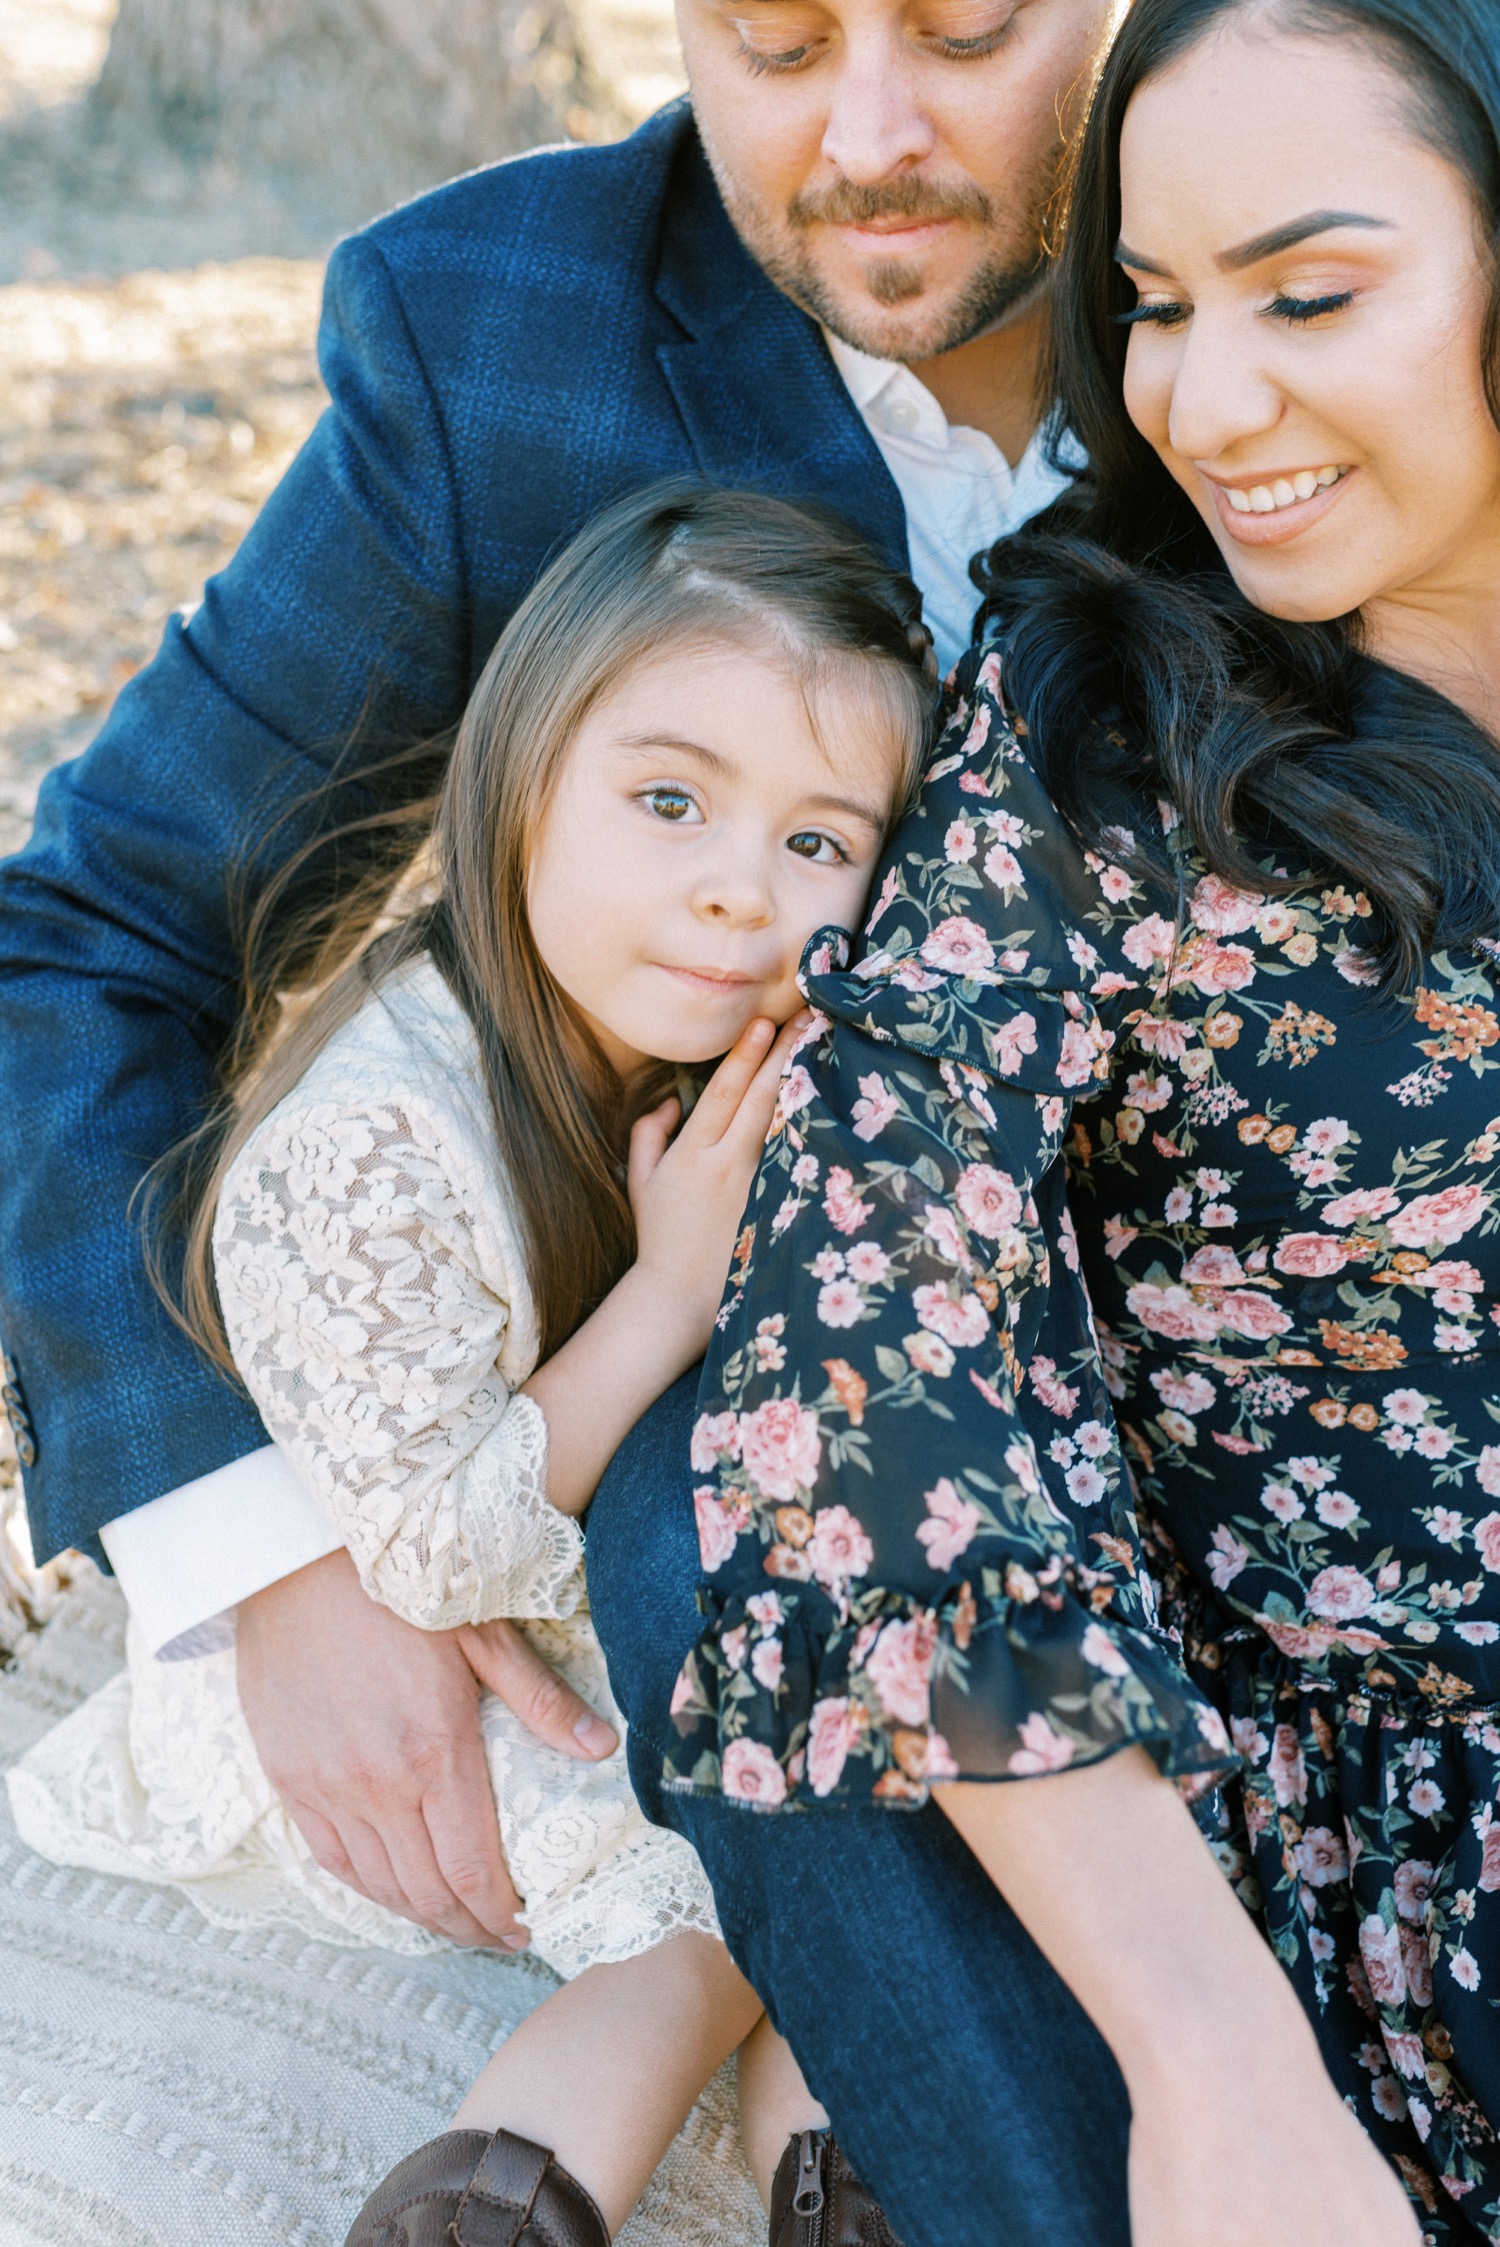 Get Best Family Portraits PhotoShoot Price & Packages